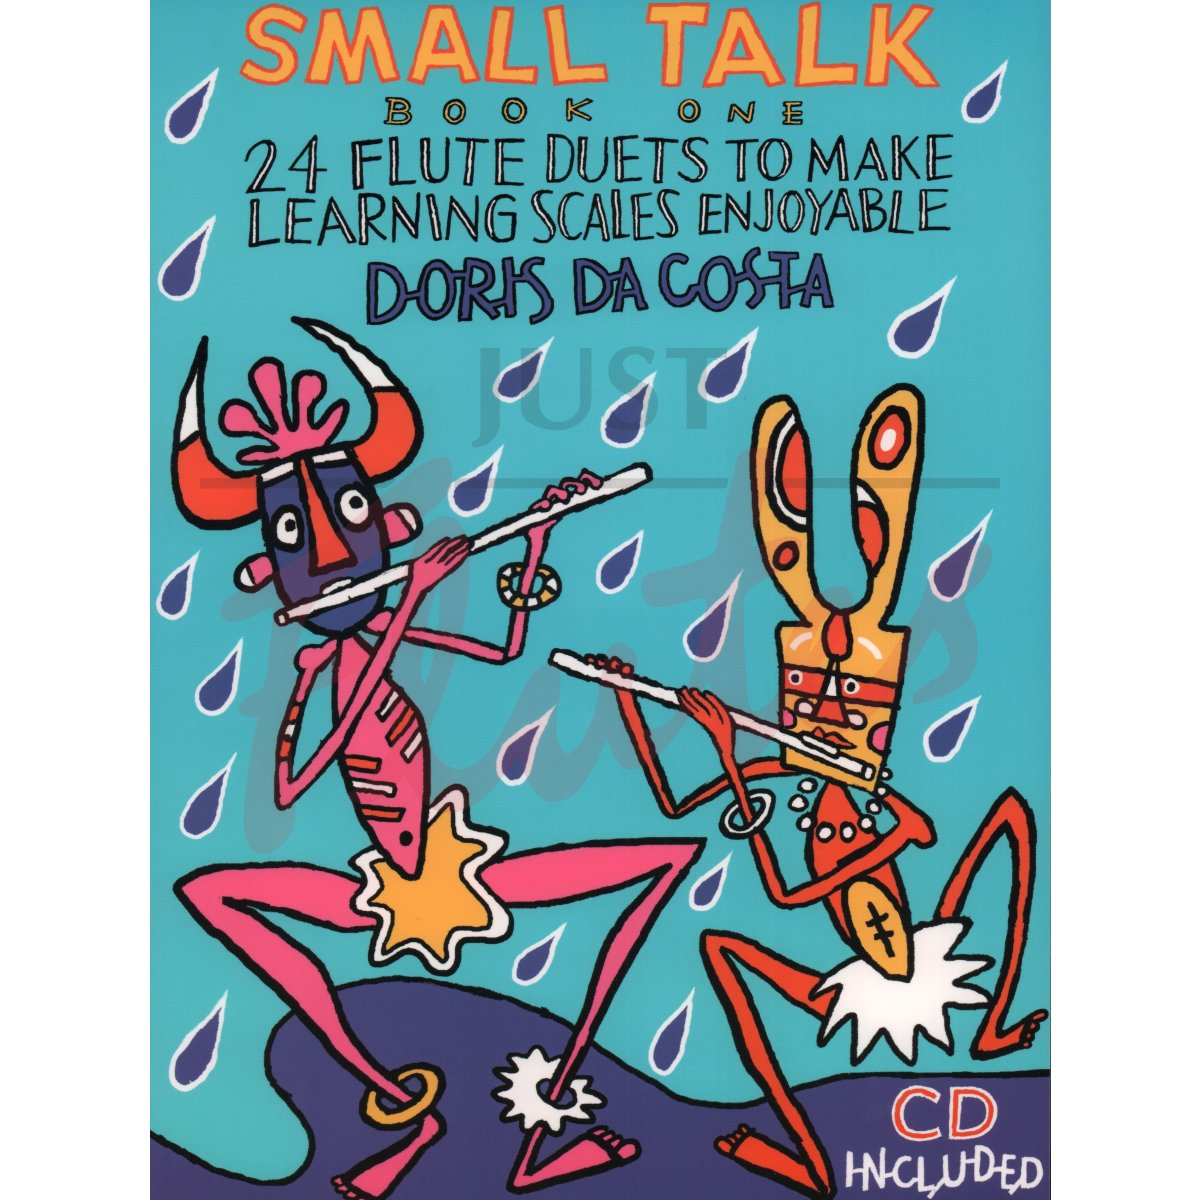 Small Talk for Two Flutes, Book 1